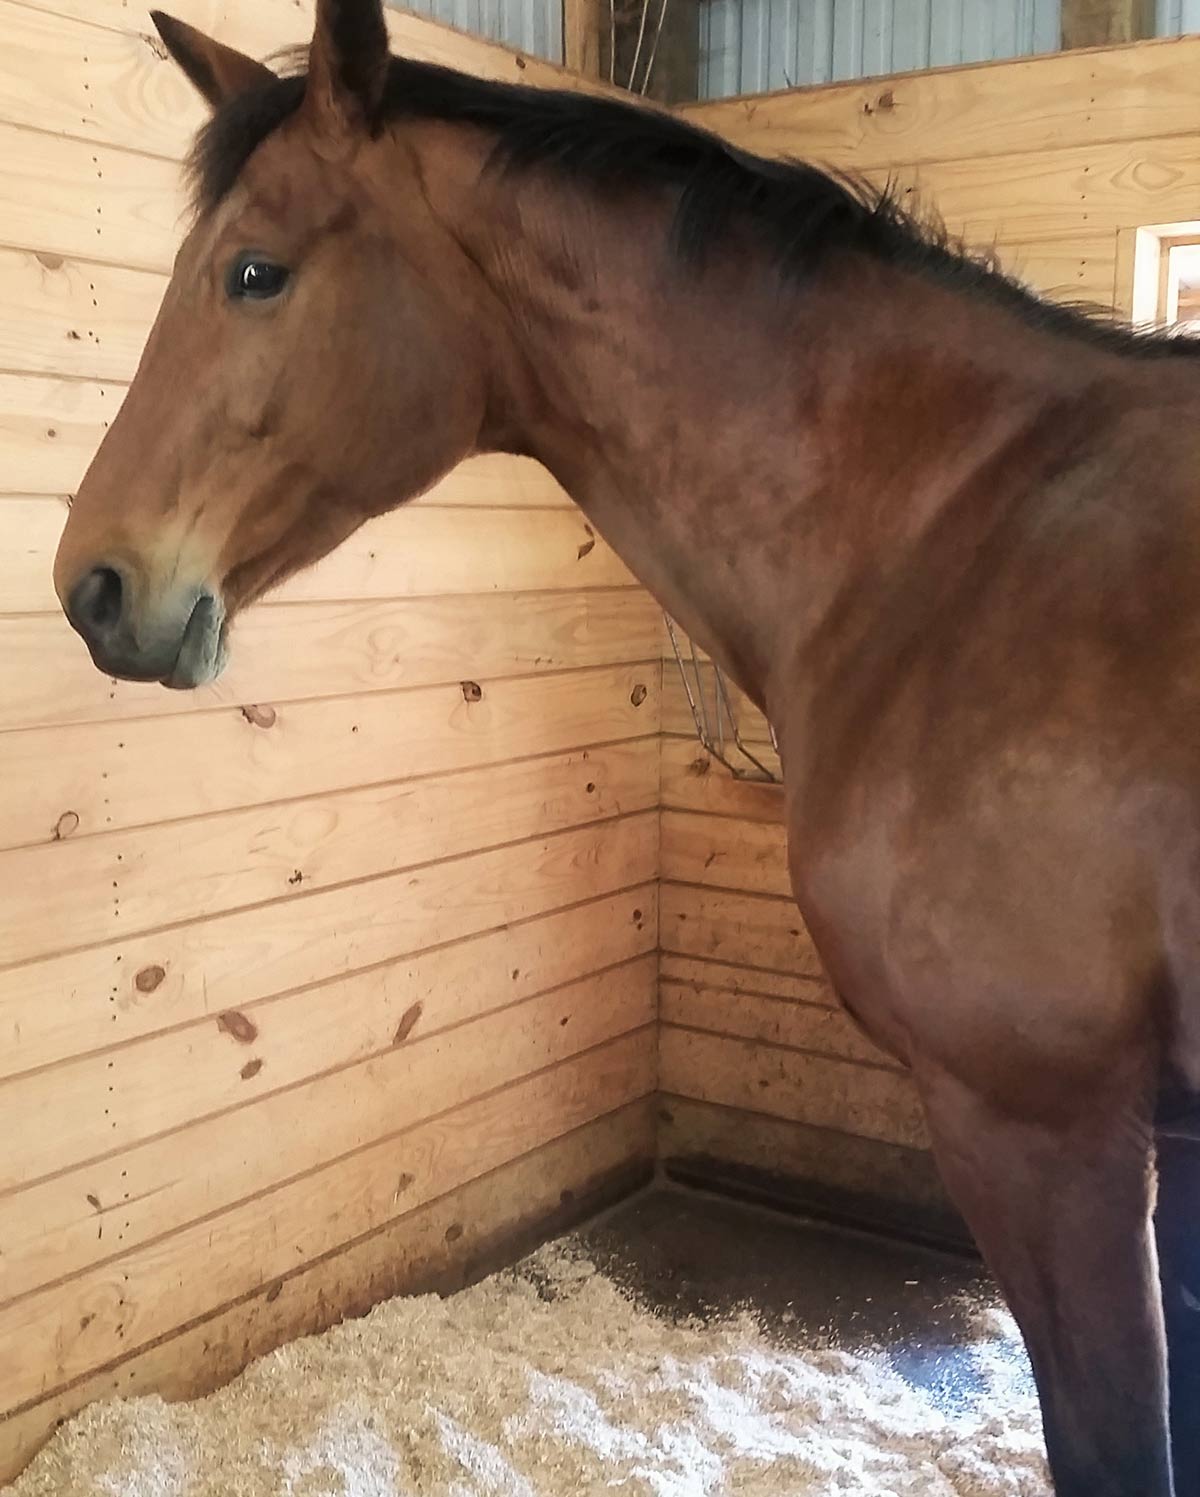 A brown horse in a stall with hemp bedding